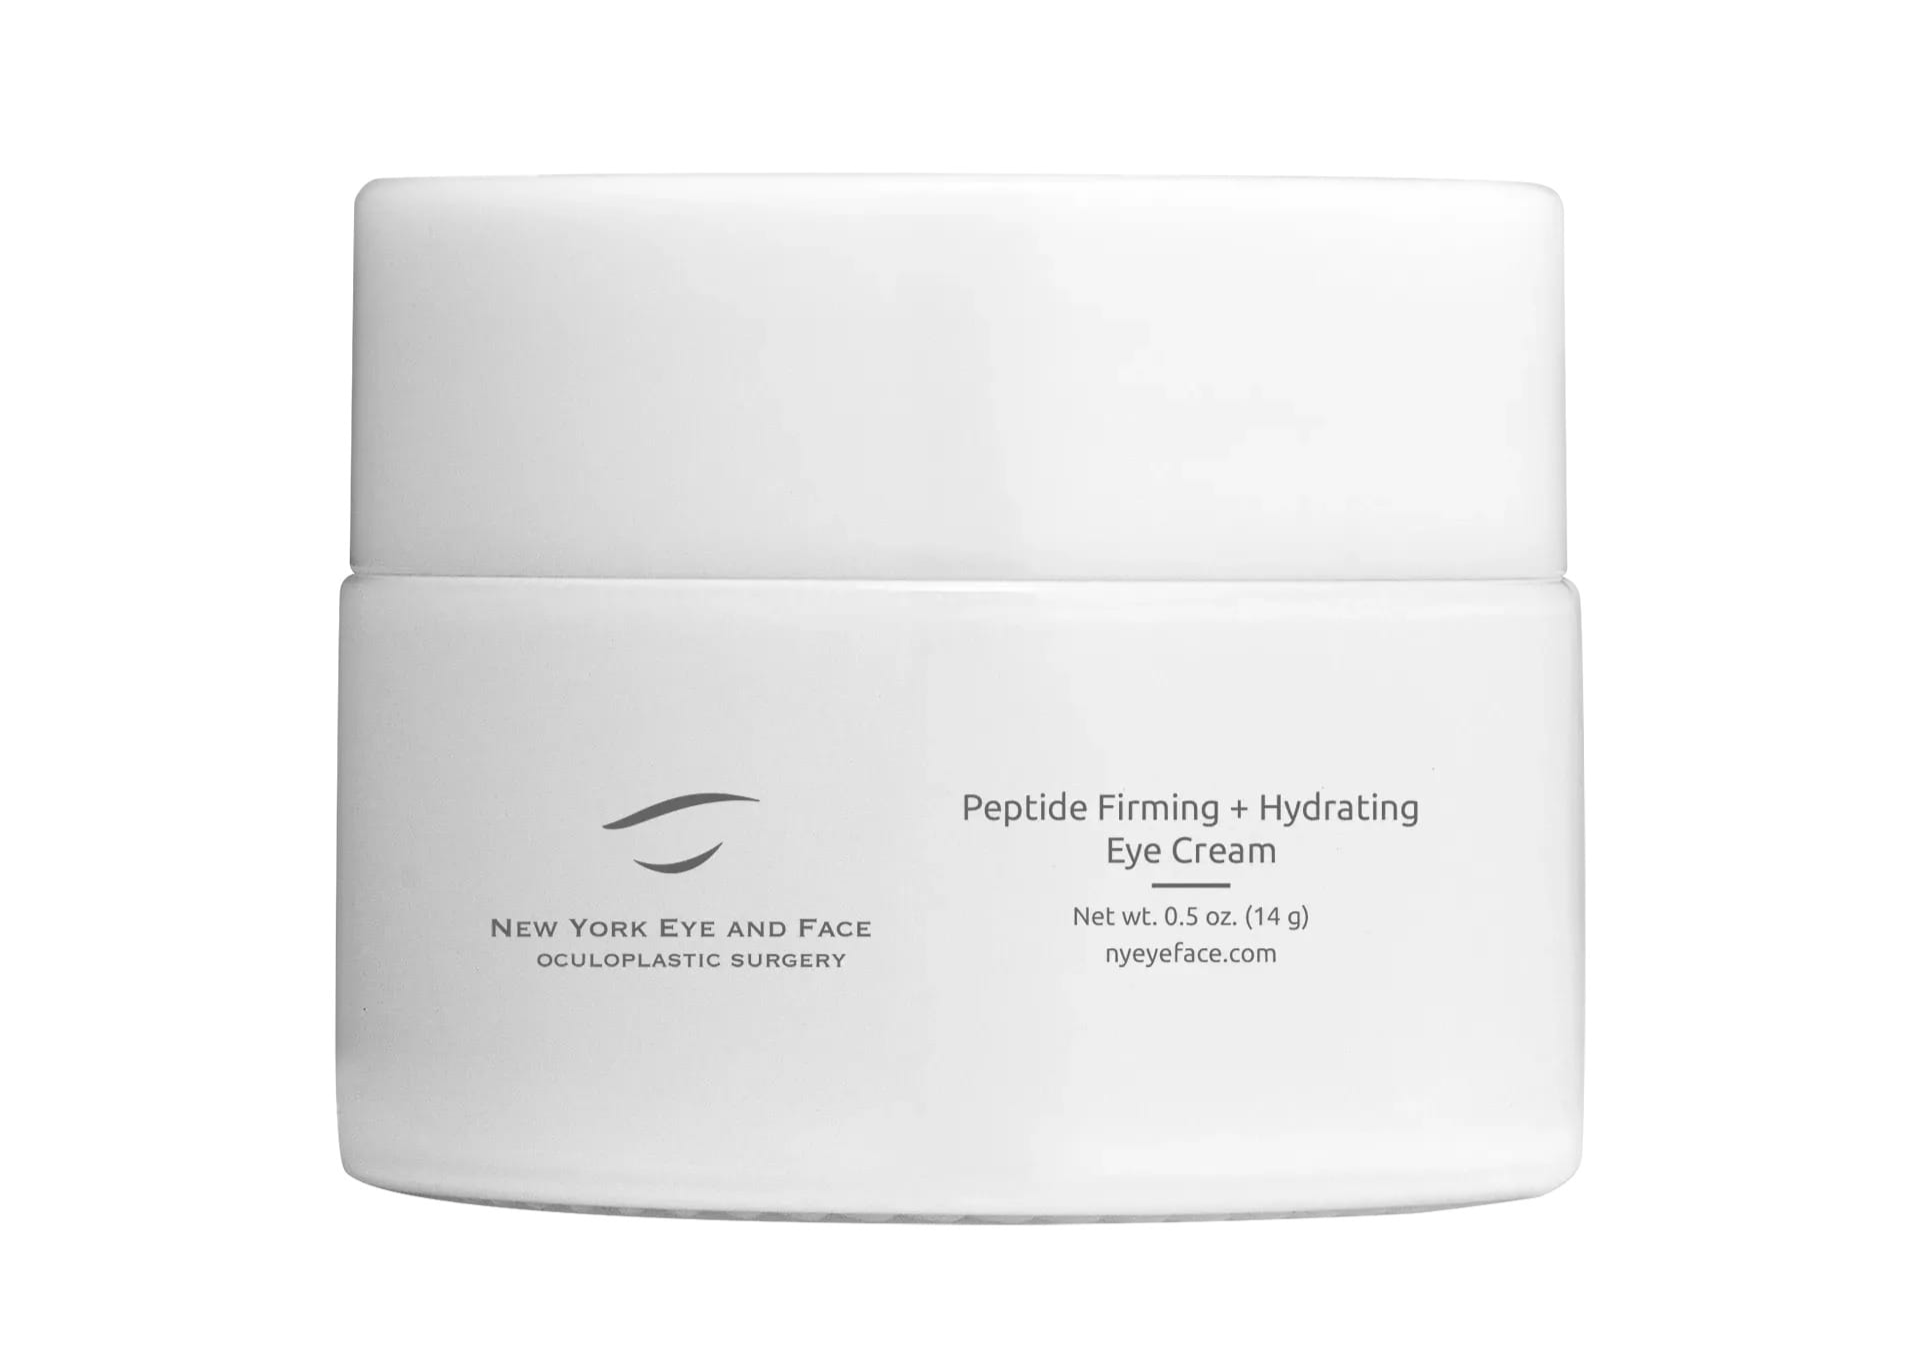 Peptide Firming and Hydrating Eye Cream